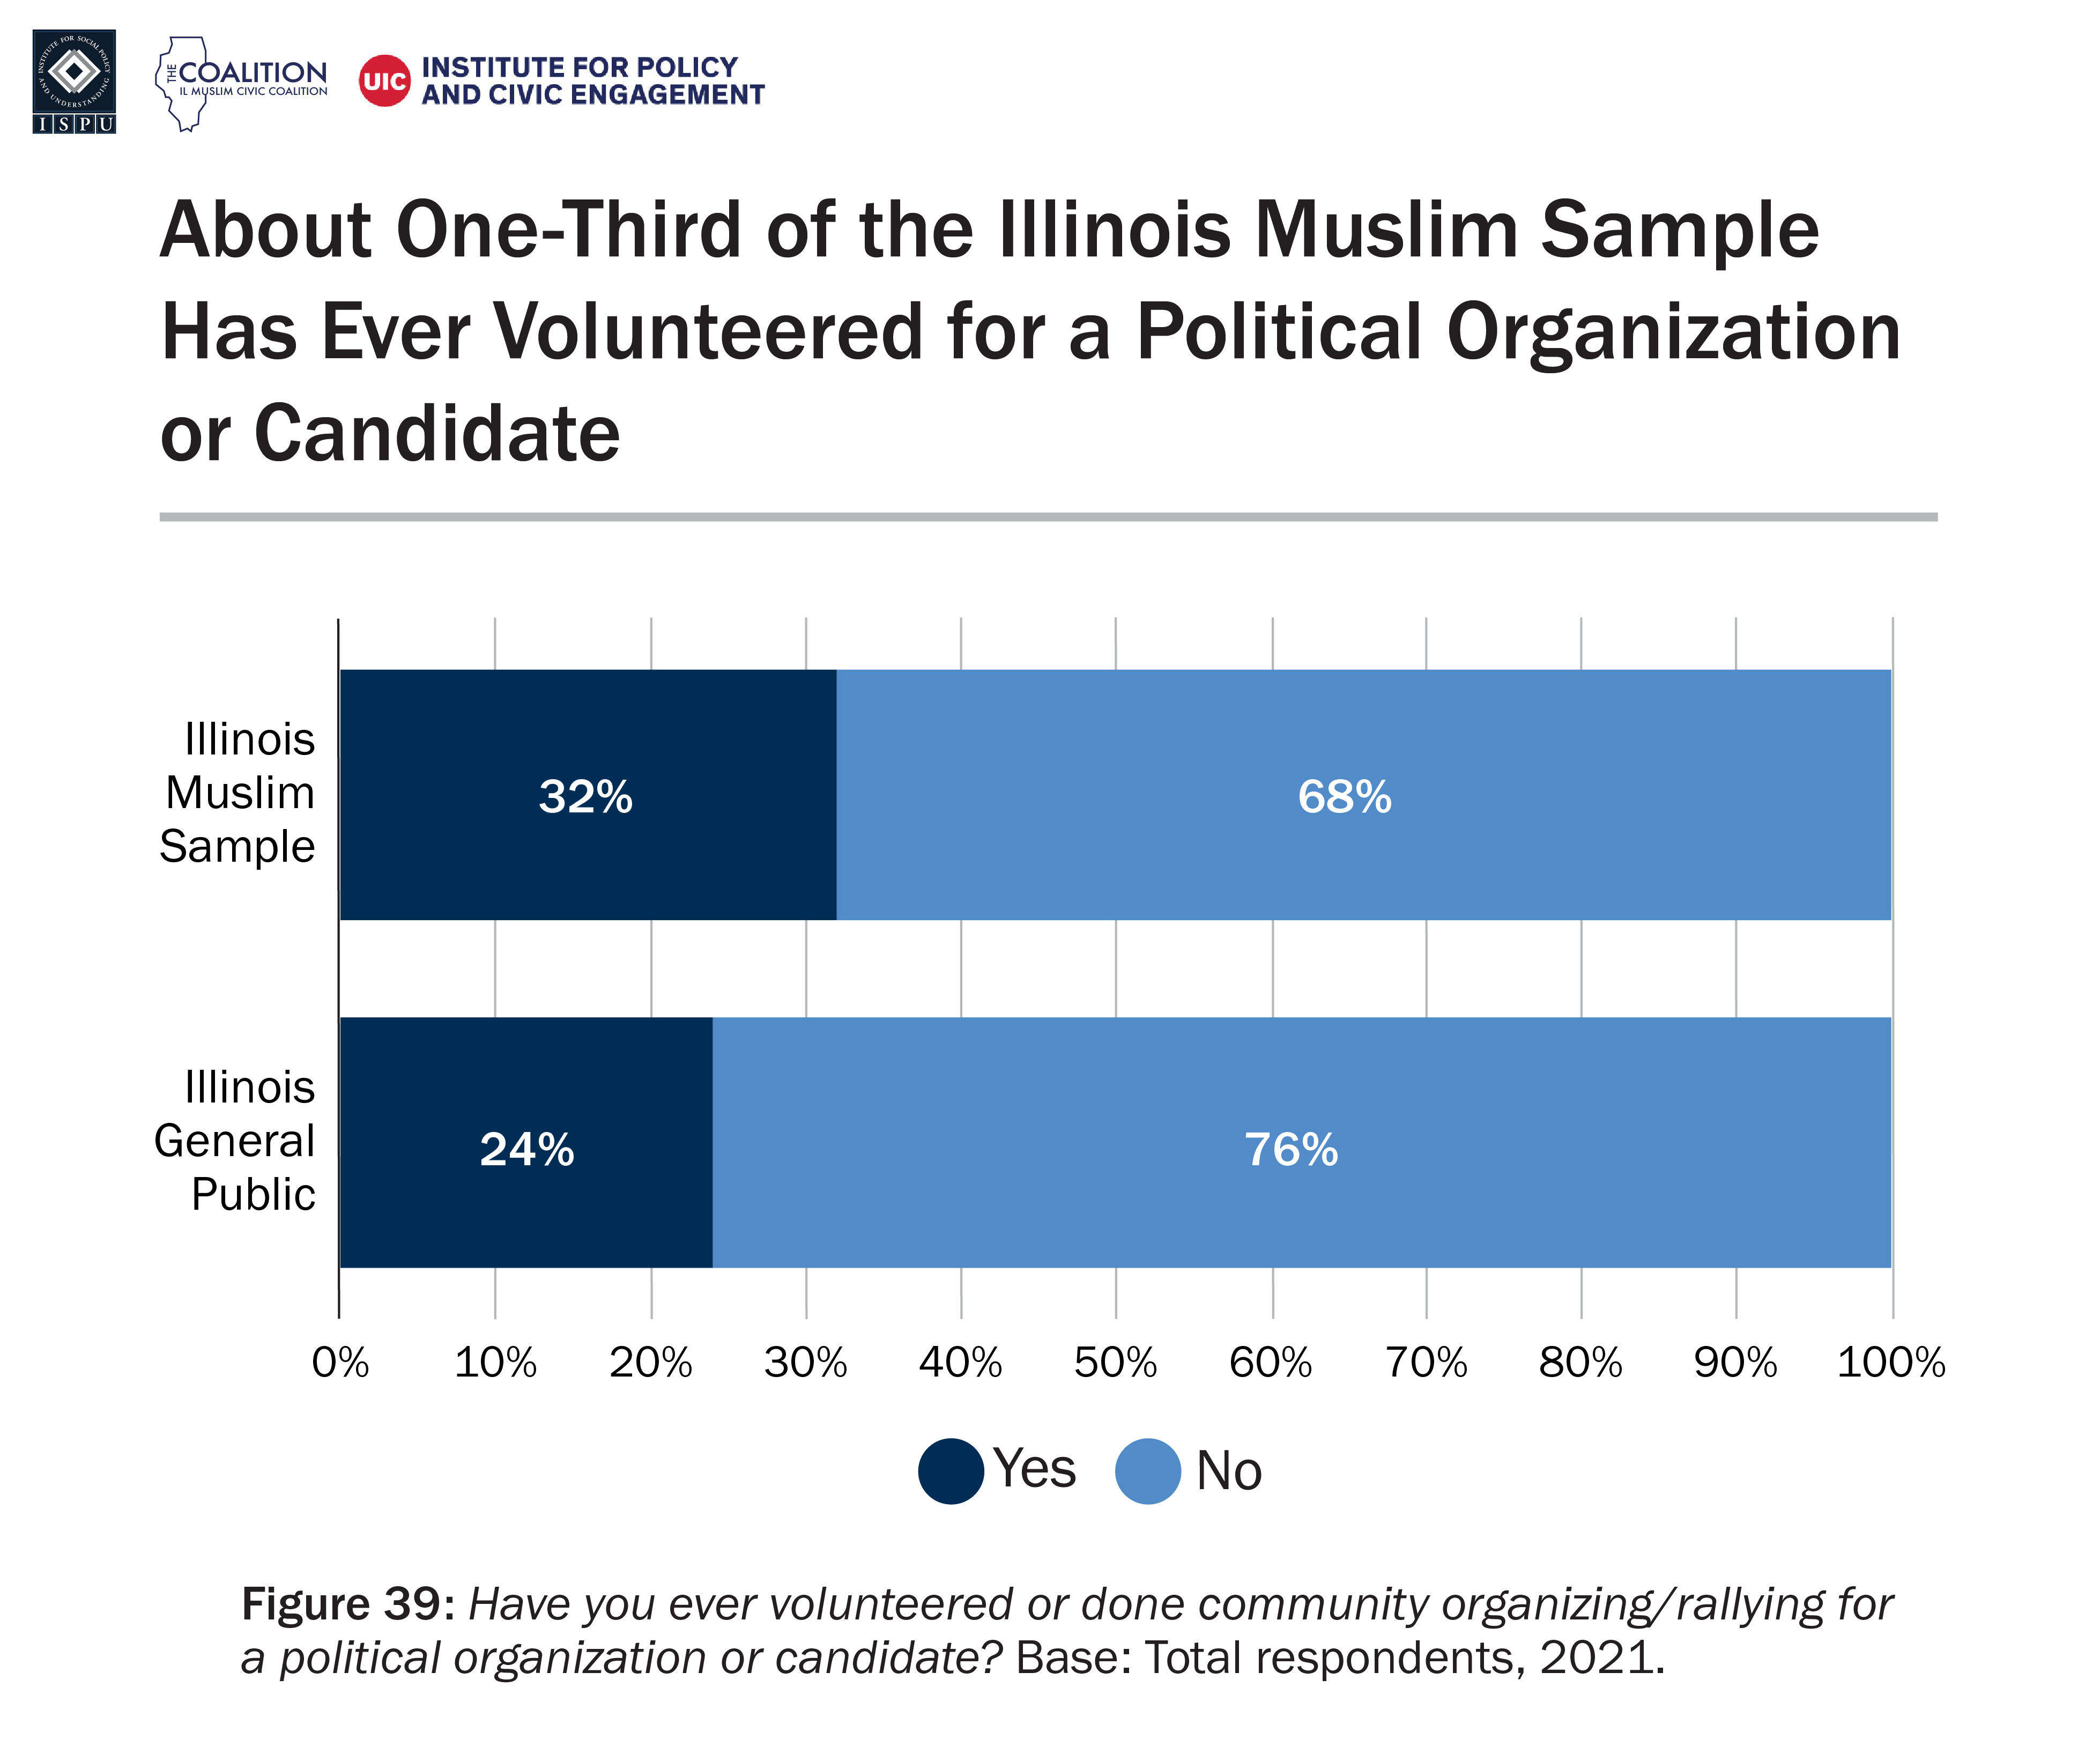 A bar graph showing the proportion of the Illinois Muslim sample and Illinois general public who have ever volunteered or done community organizing for a political organization or candidate